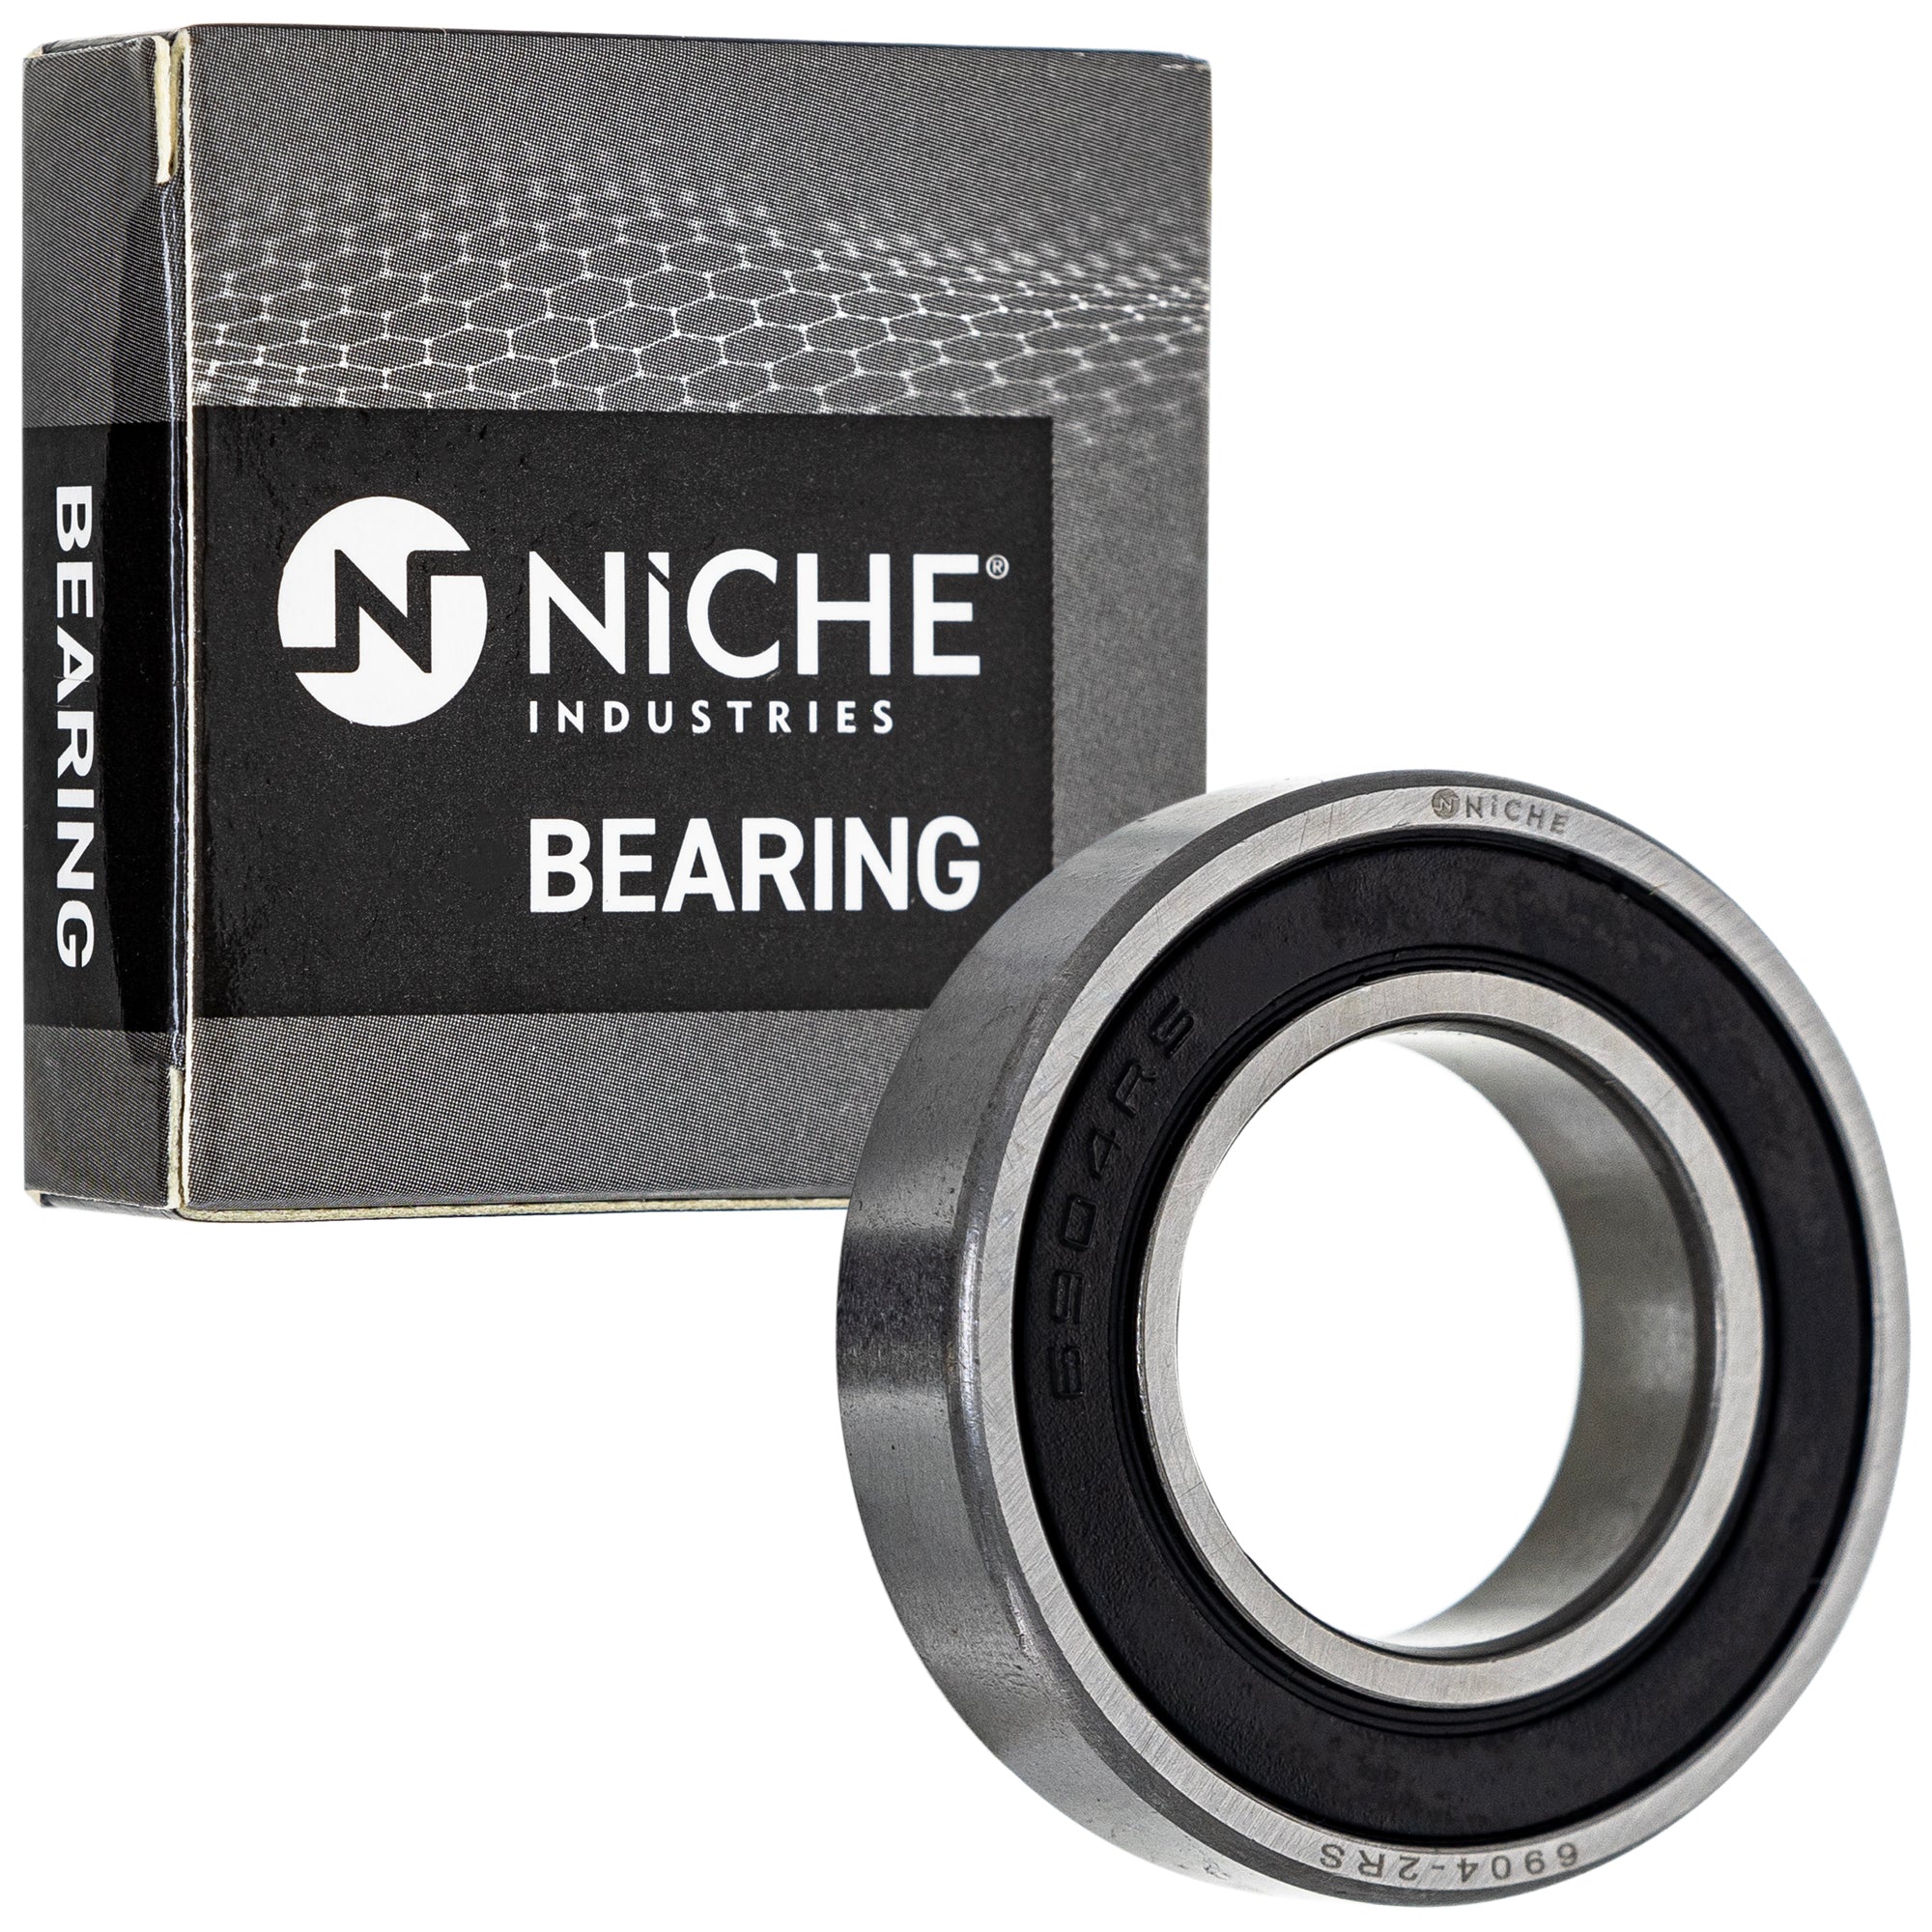 NICHE 519-CBB2258R Bearing 2-Pack for zOTHER YZ450F YZ426F YZ400F